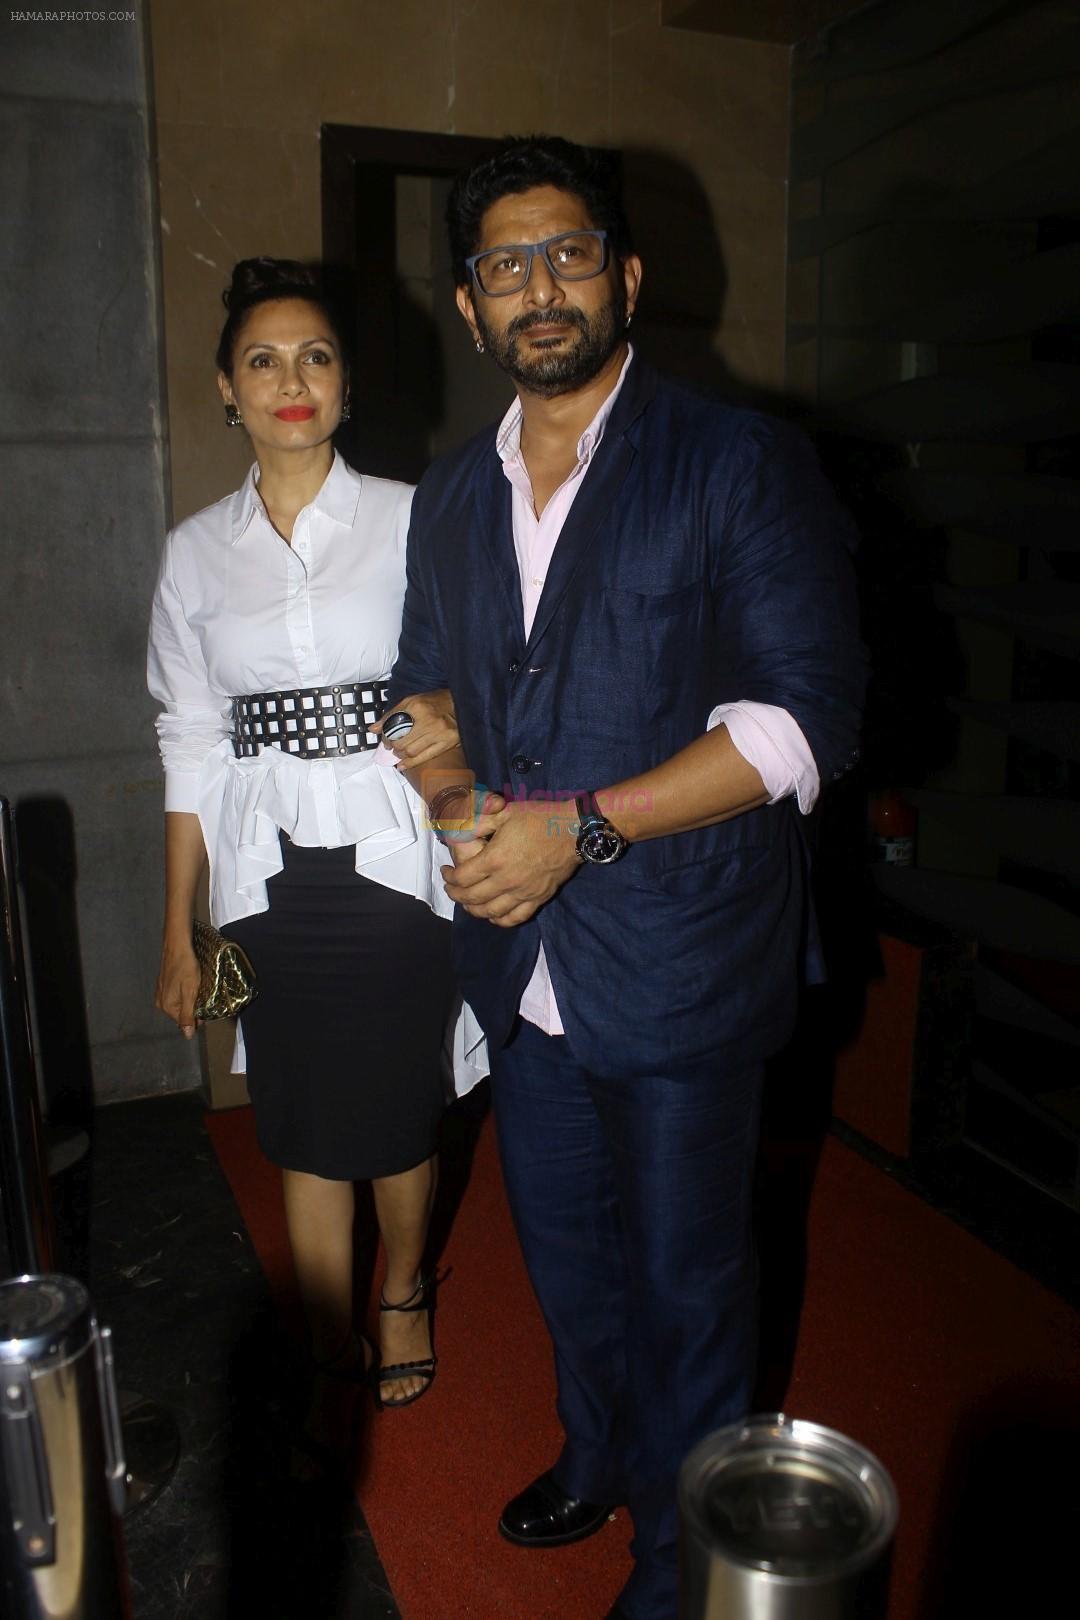 Arshad Warsi, Maria Goretti at the Special Screening Of Film Tubelight in Mumbai on 22nd June 2017